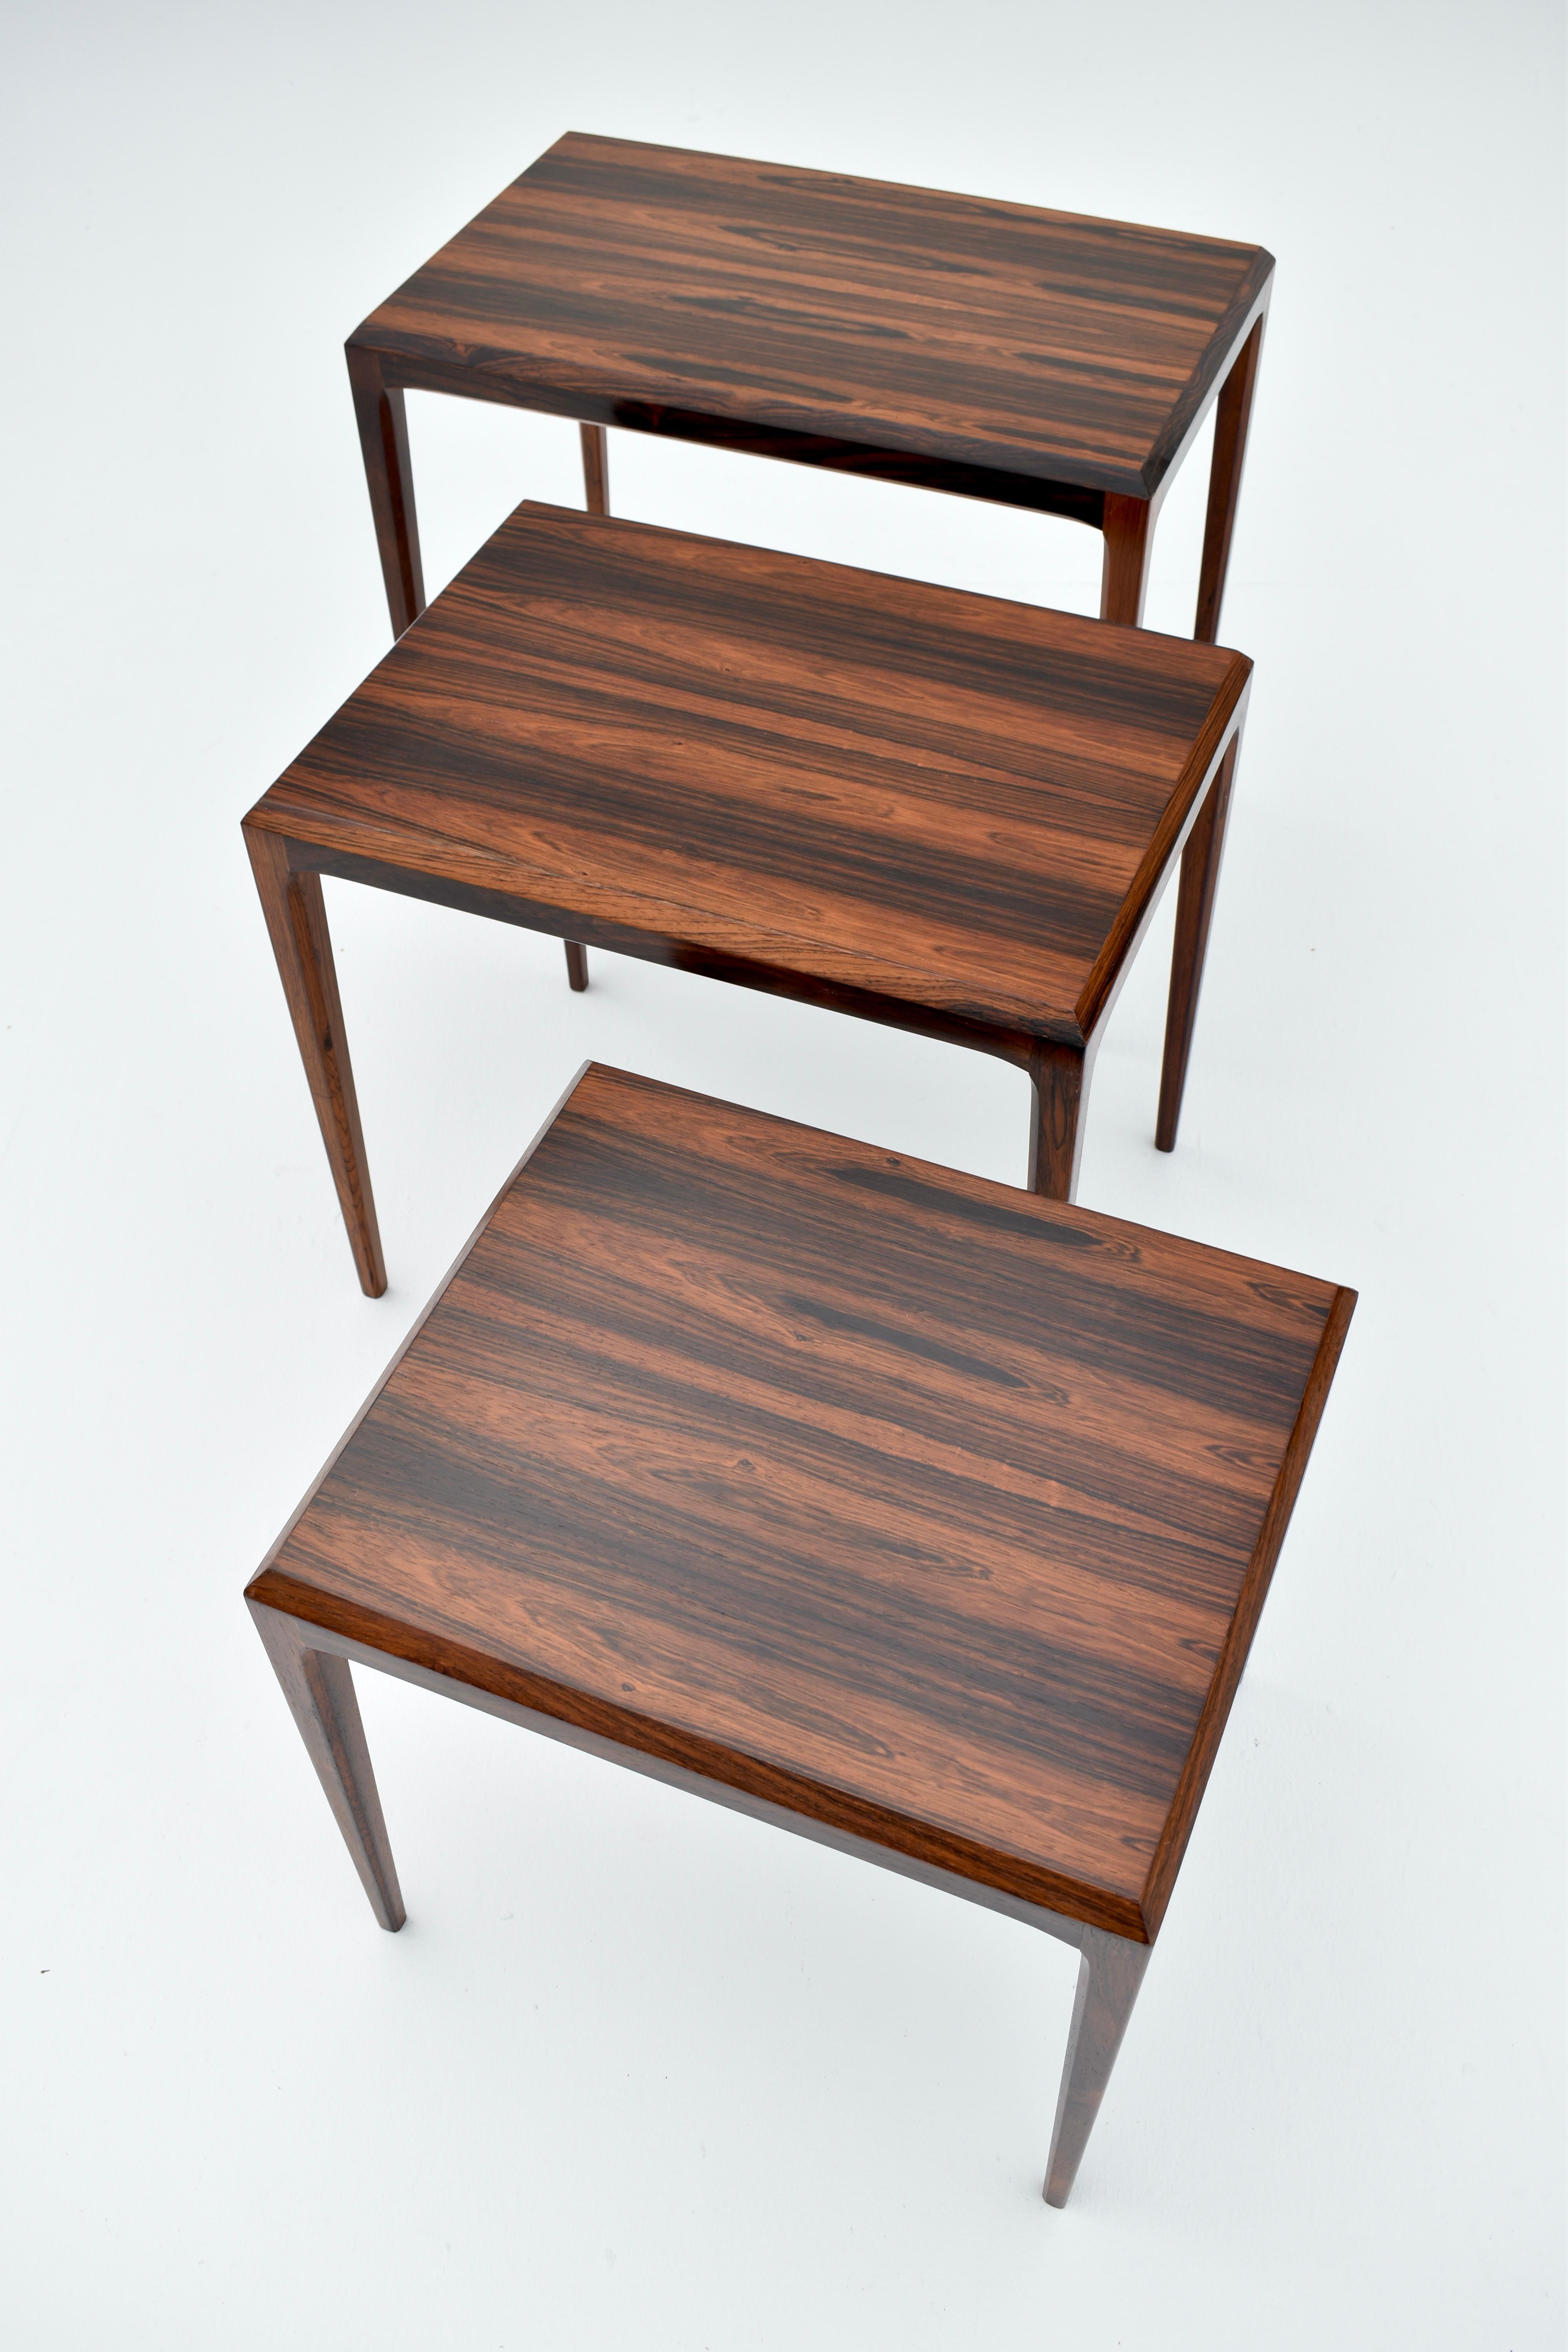 Midcentury Danish Set Of 3 Rosewood Nesting Tables BY Johannes Andersen For CFC For Sale 4